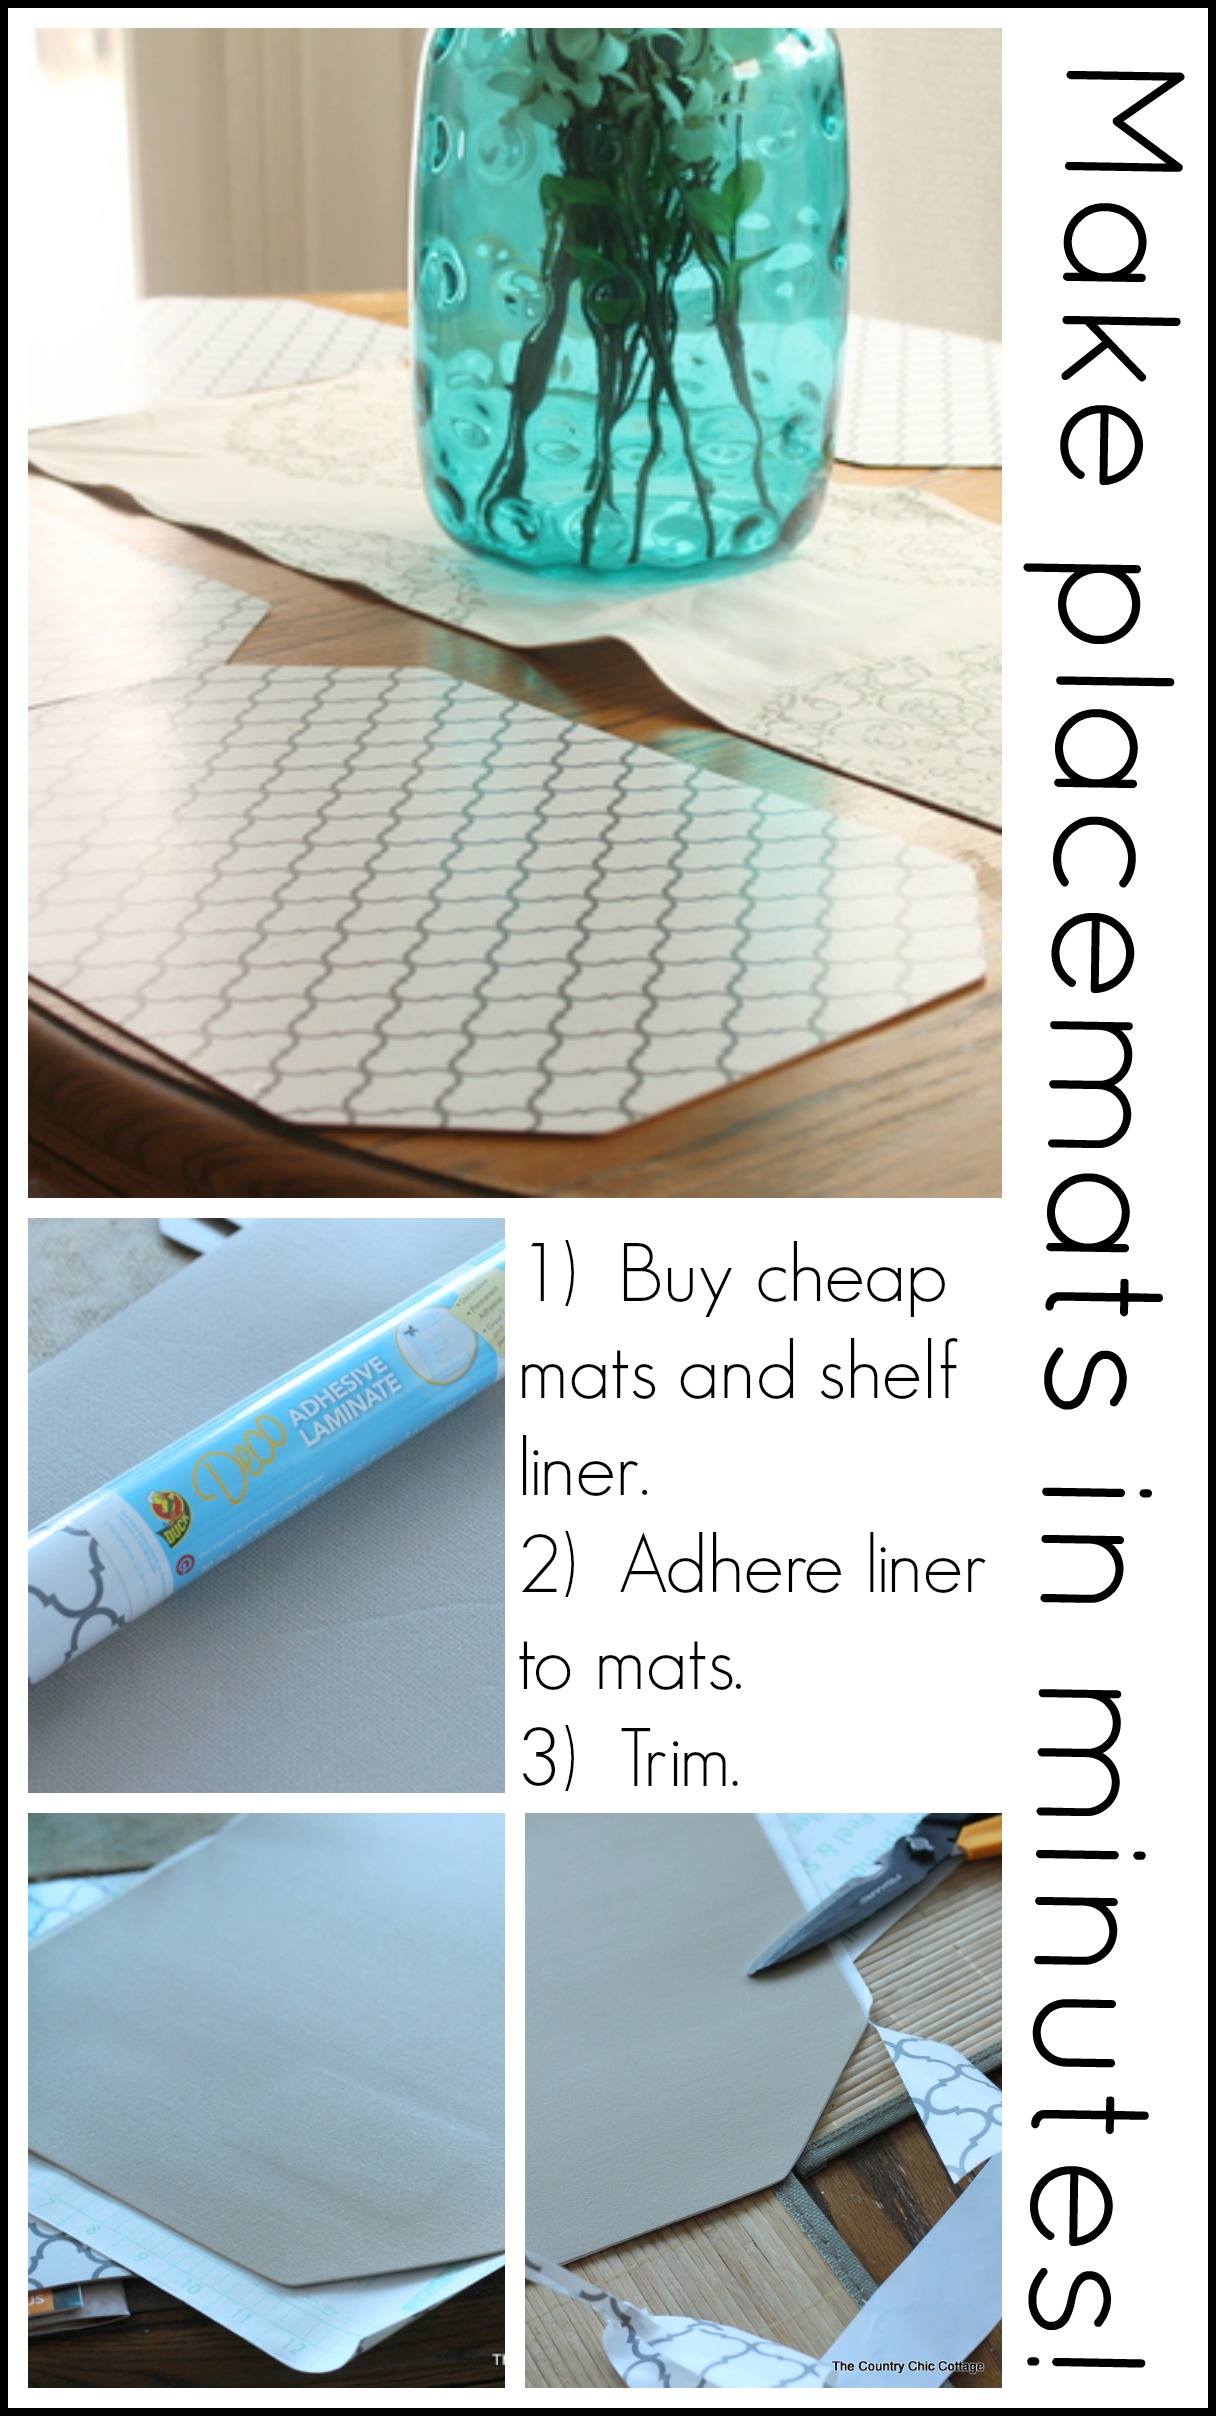 Can't find placemats you love?  Make your own in minutes with this trick!